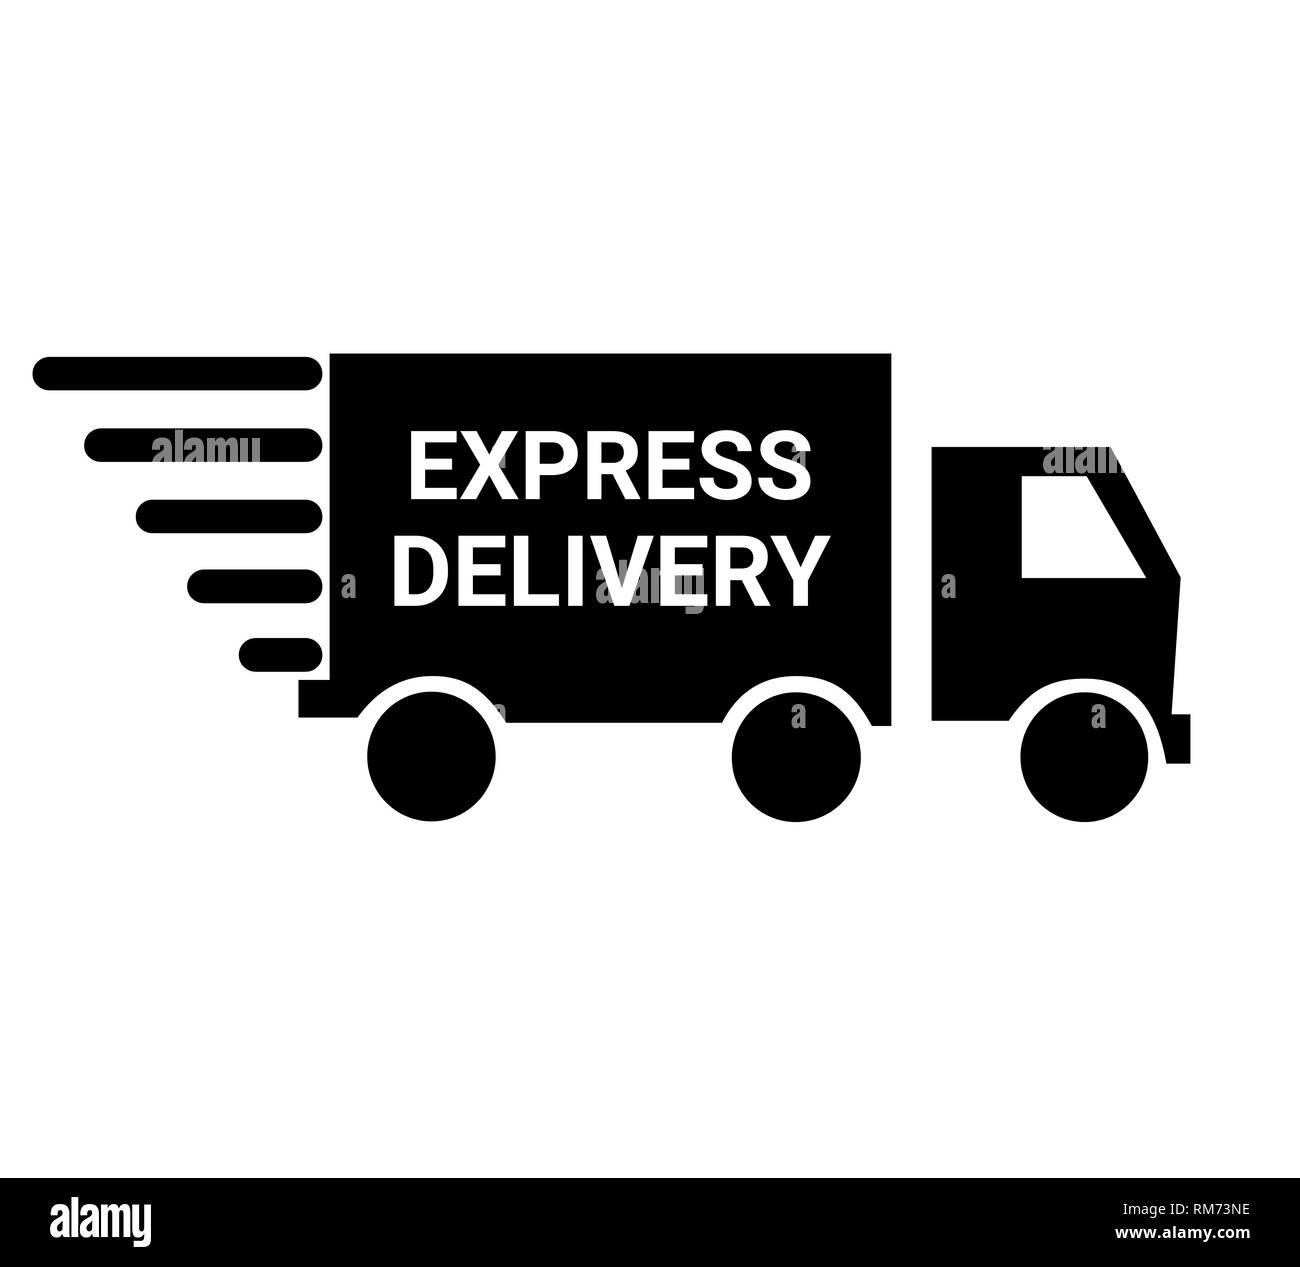 Express delivery symbol Stock Photo - Alamy